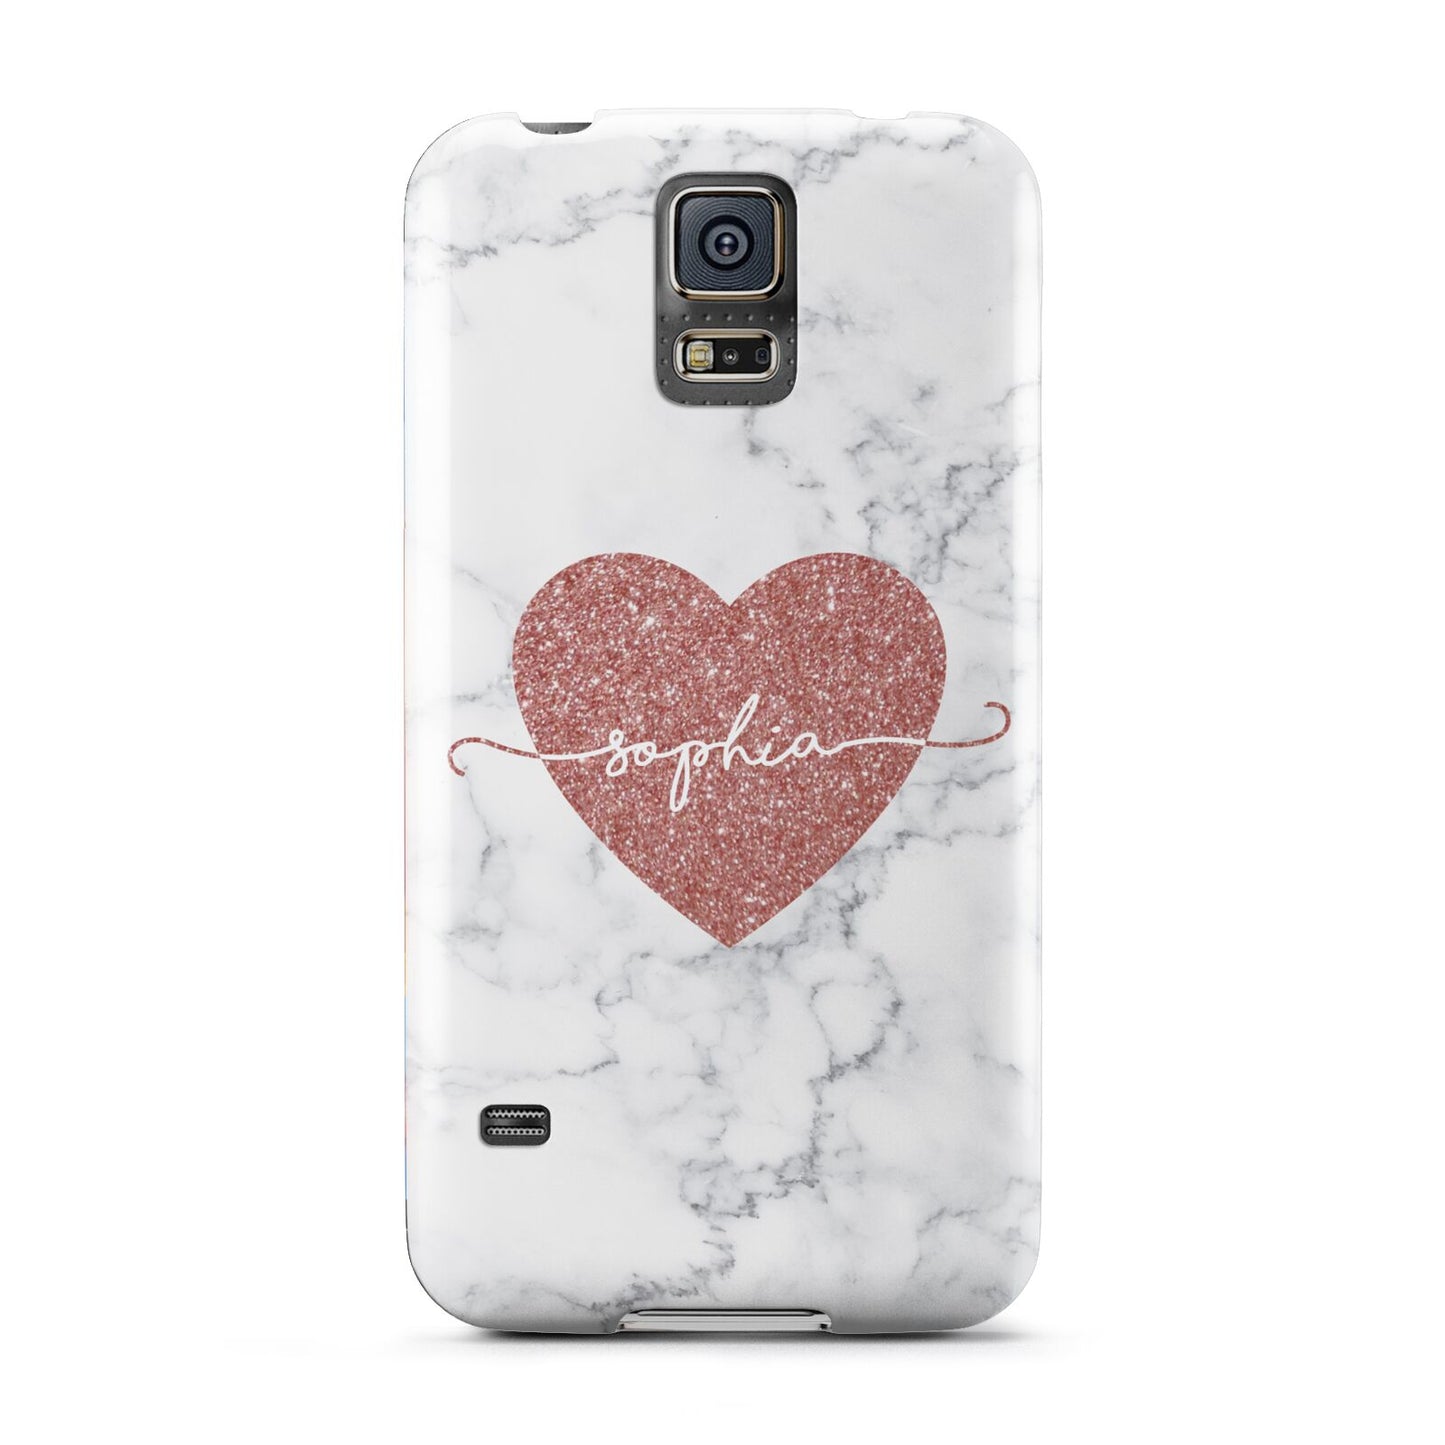 Marble Rose Gold Glitter Heart Personalised Name Samsung Galaxy S5 Case